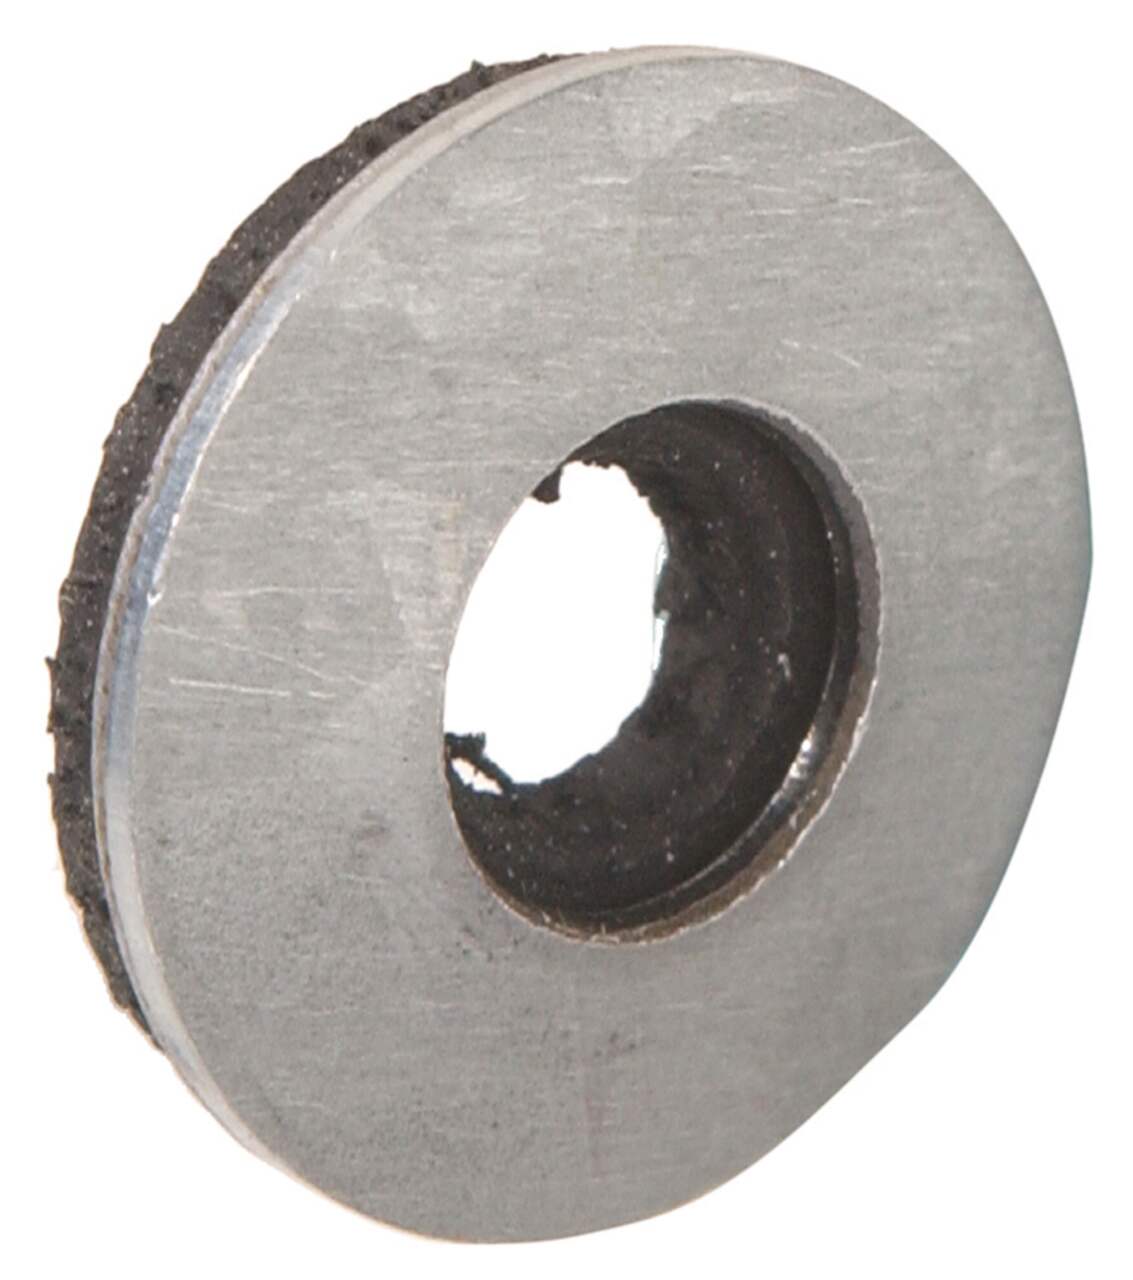 Hillman Bonded Neoprene Washers, For Metal Applications, Assorted Sizes